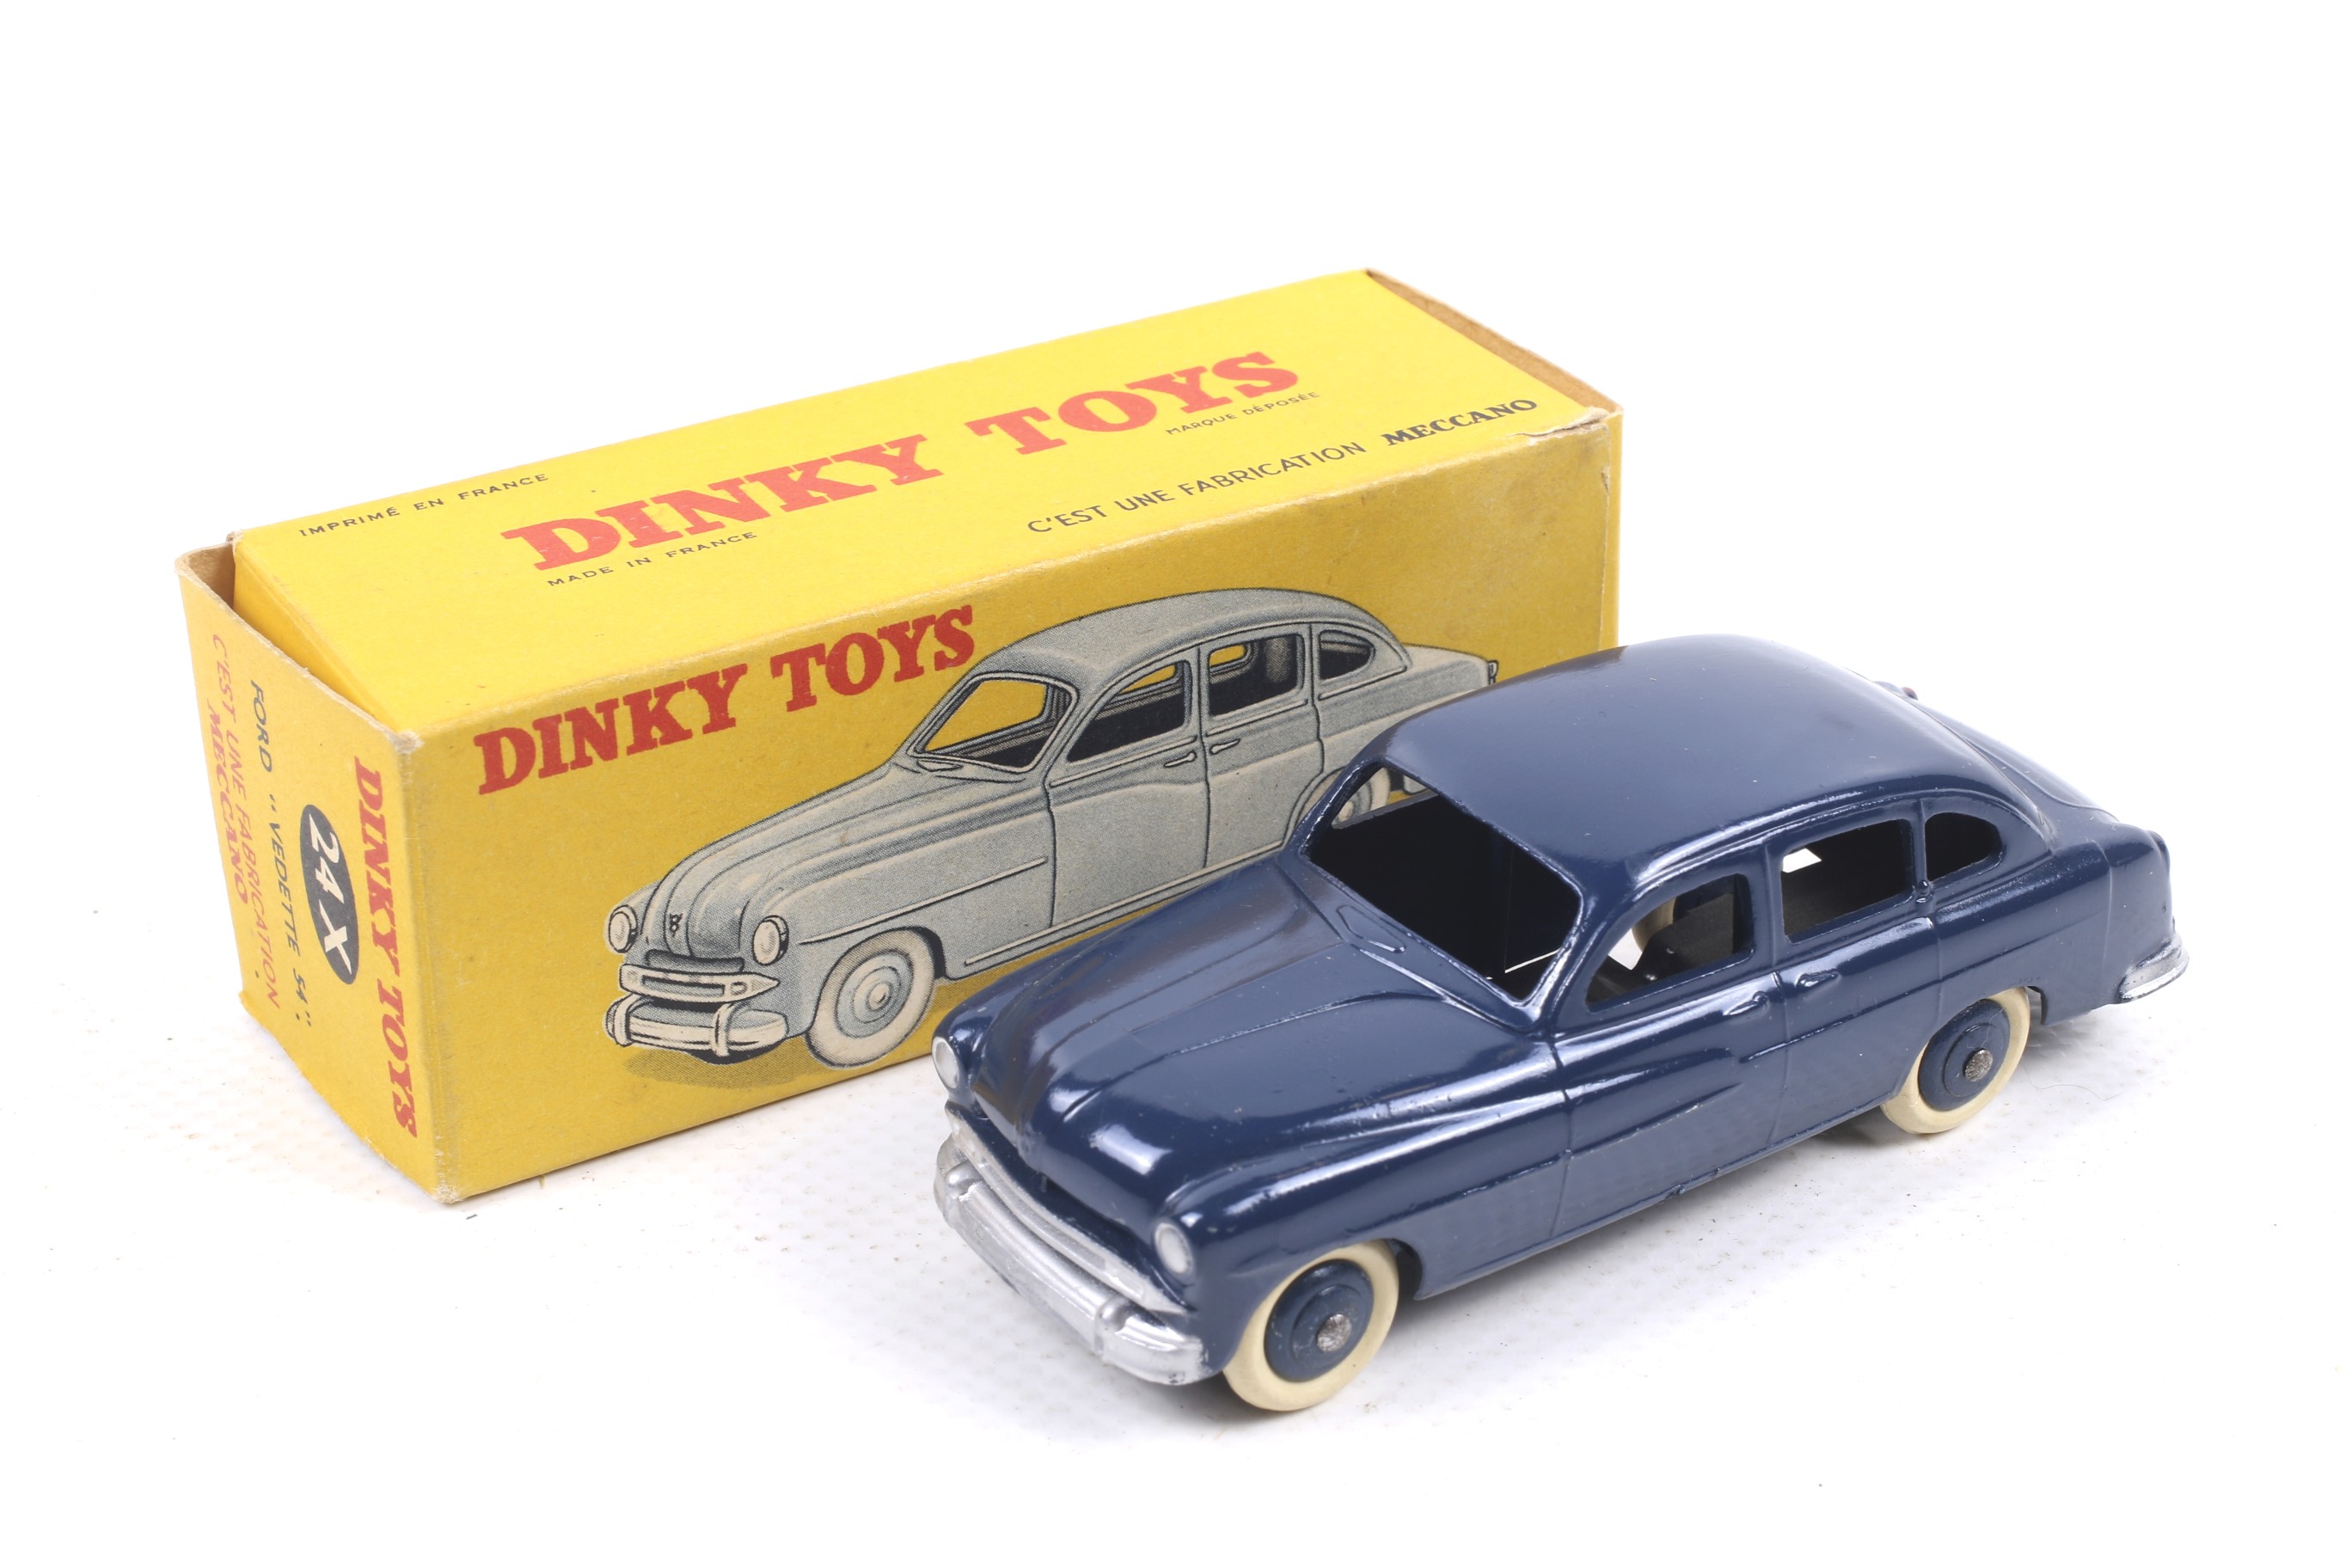 A Dinky diecast Ford Vadette 54. No. 24x, with blue body and white wheels, in original box.